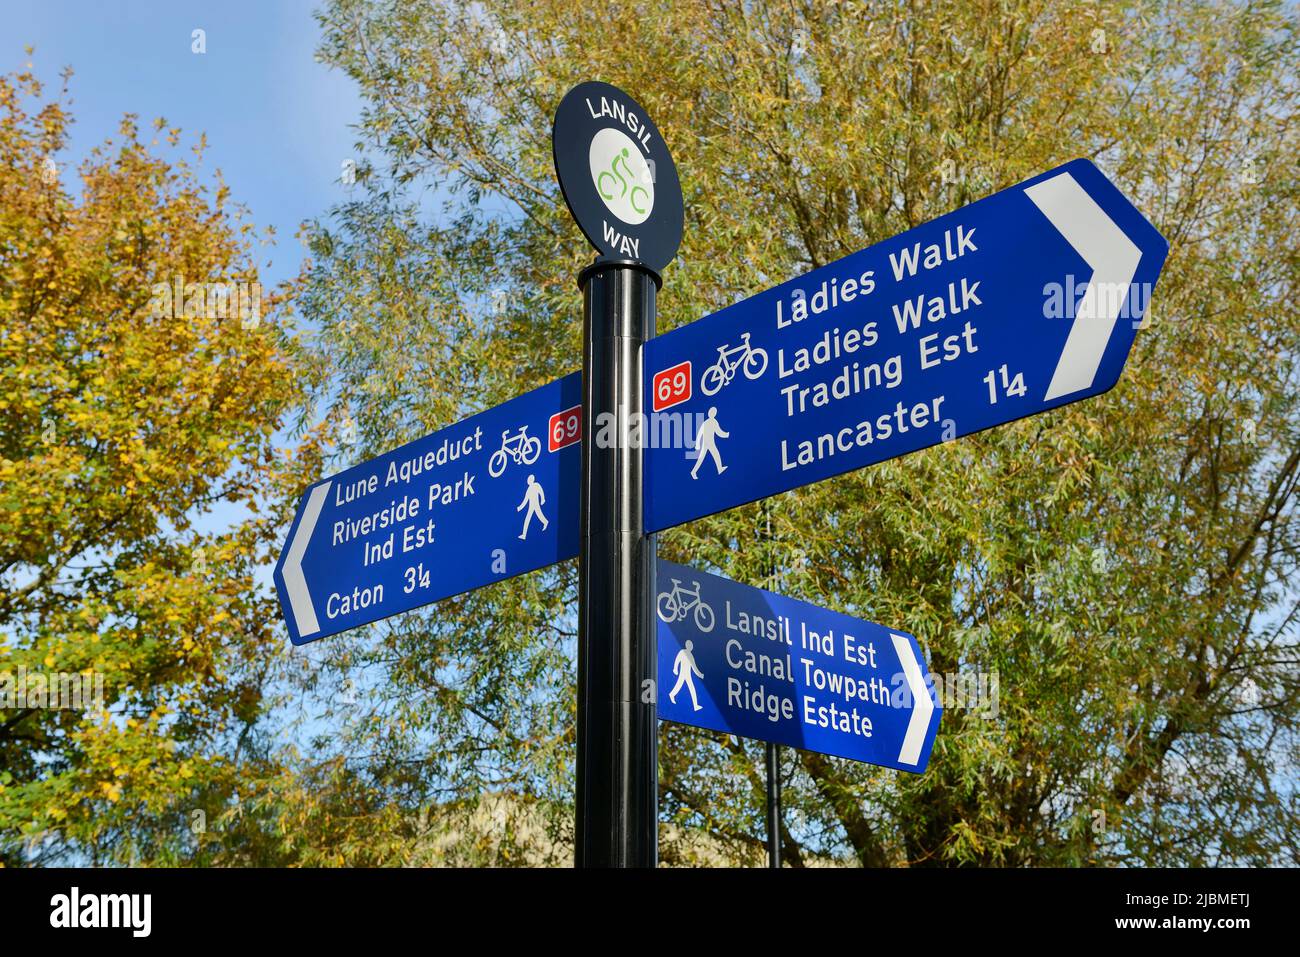 A signpost on the Lanais Way pointing to various cycle and walking routes in Lancaster city centre UK Stock Photo